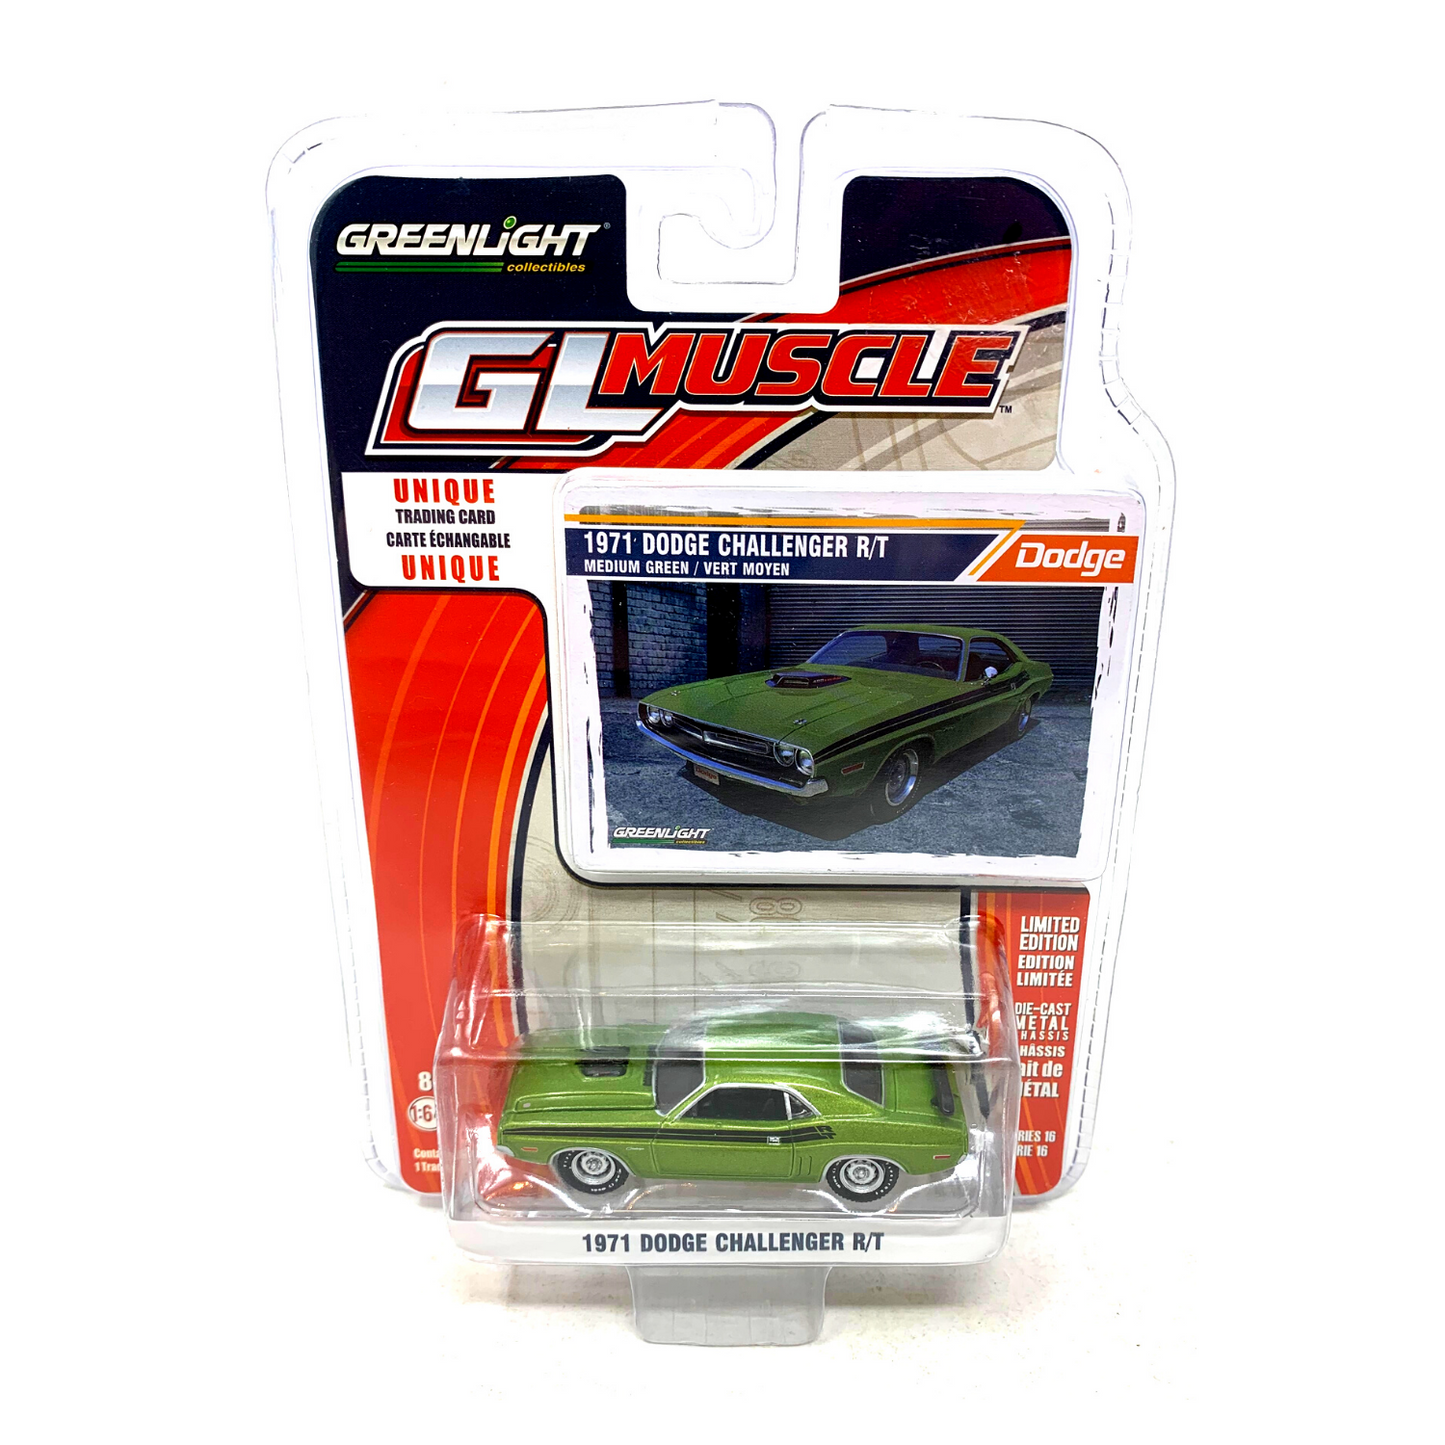 Greenlight GL Muscle Series 16 1971 Dodge Challenger R/T 1:64 Diecast